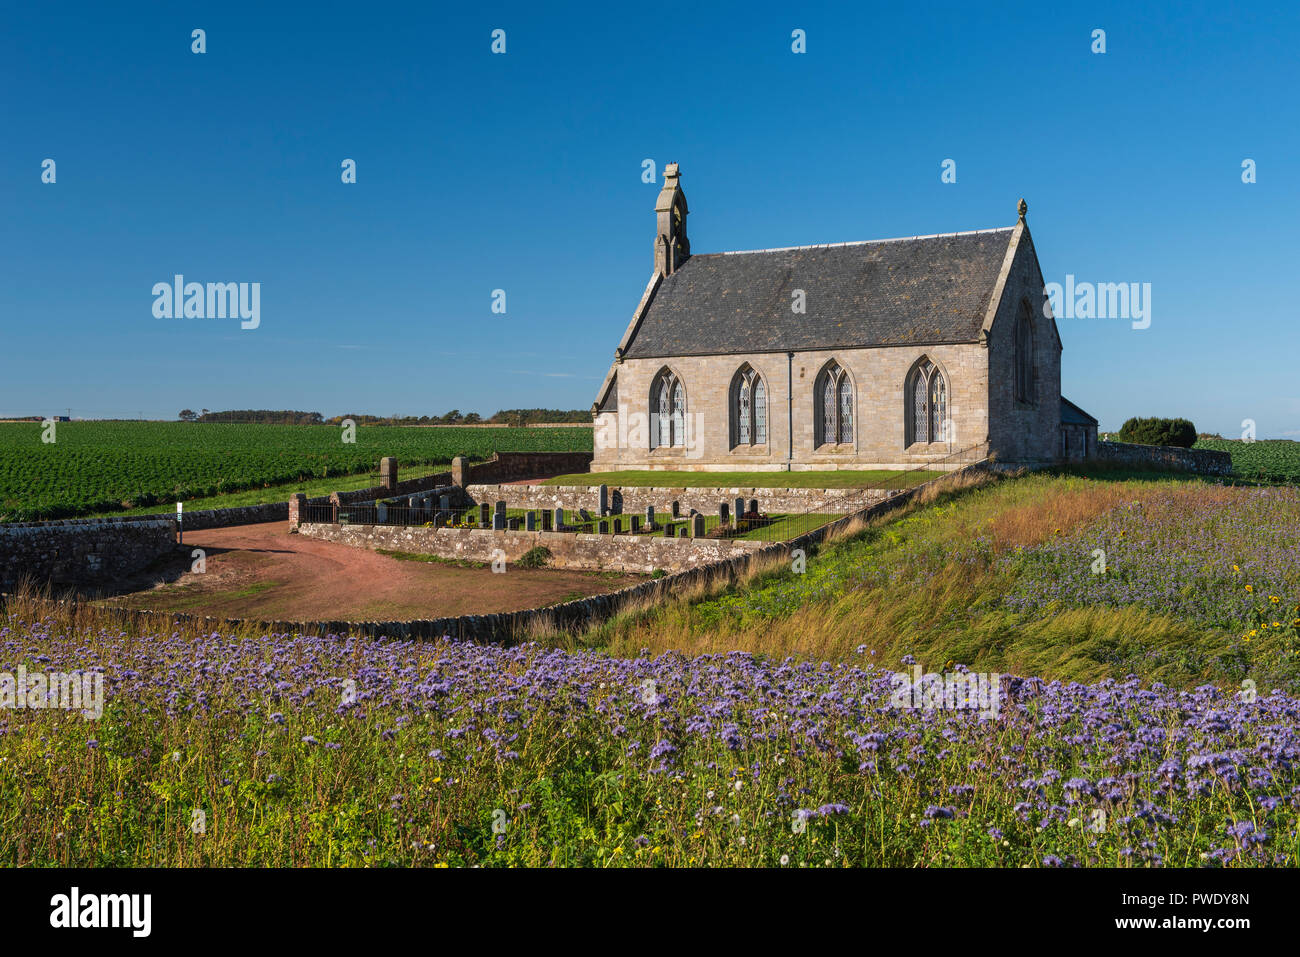 Field of Phacelia and Sunflowers  by Boarhills Church, St Andrews, Fife, Scotland. Stock Photo